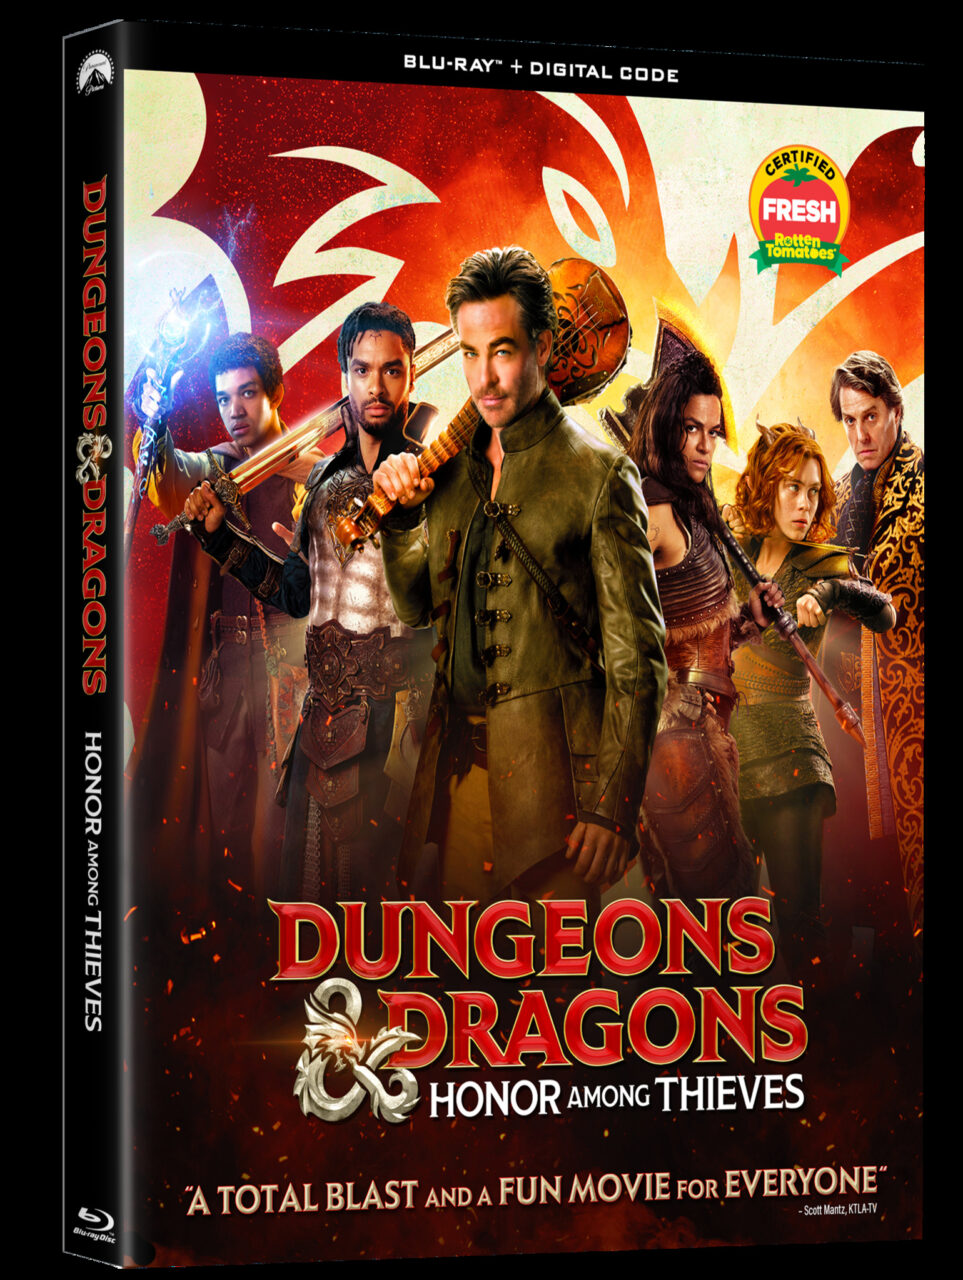 Dungeons & Dragons: Honor Among Thieves Blu-Ray Combo Pack cover (Paramount Home Entertainment)